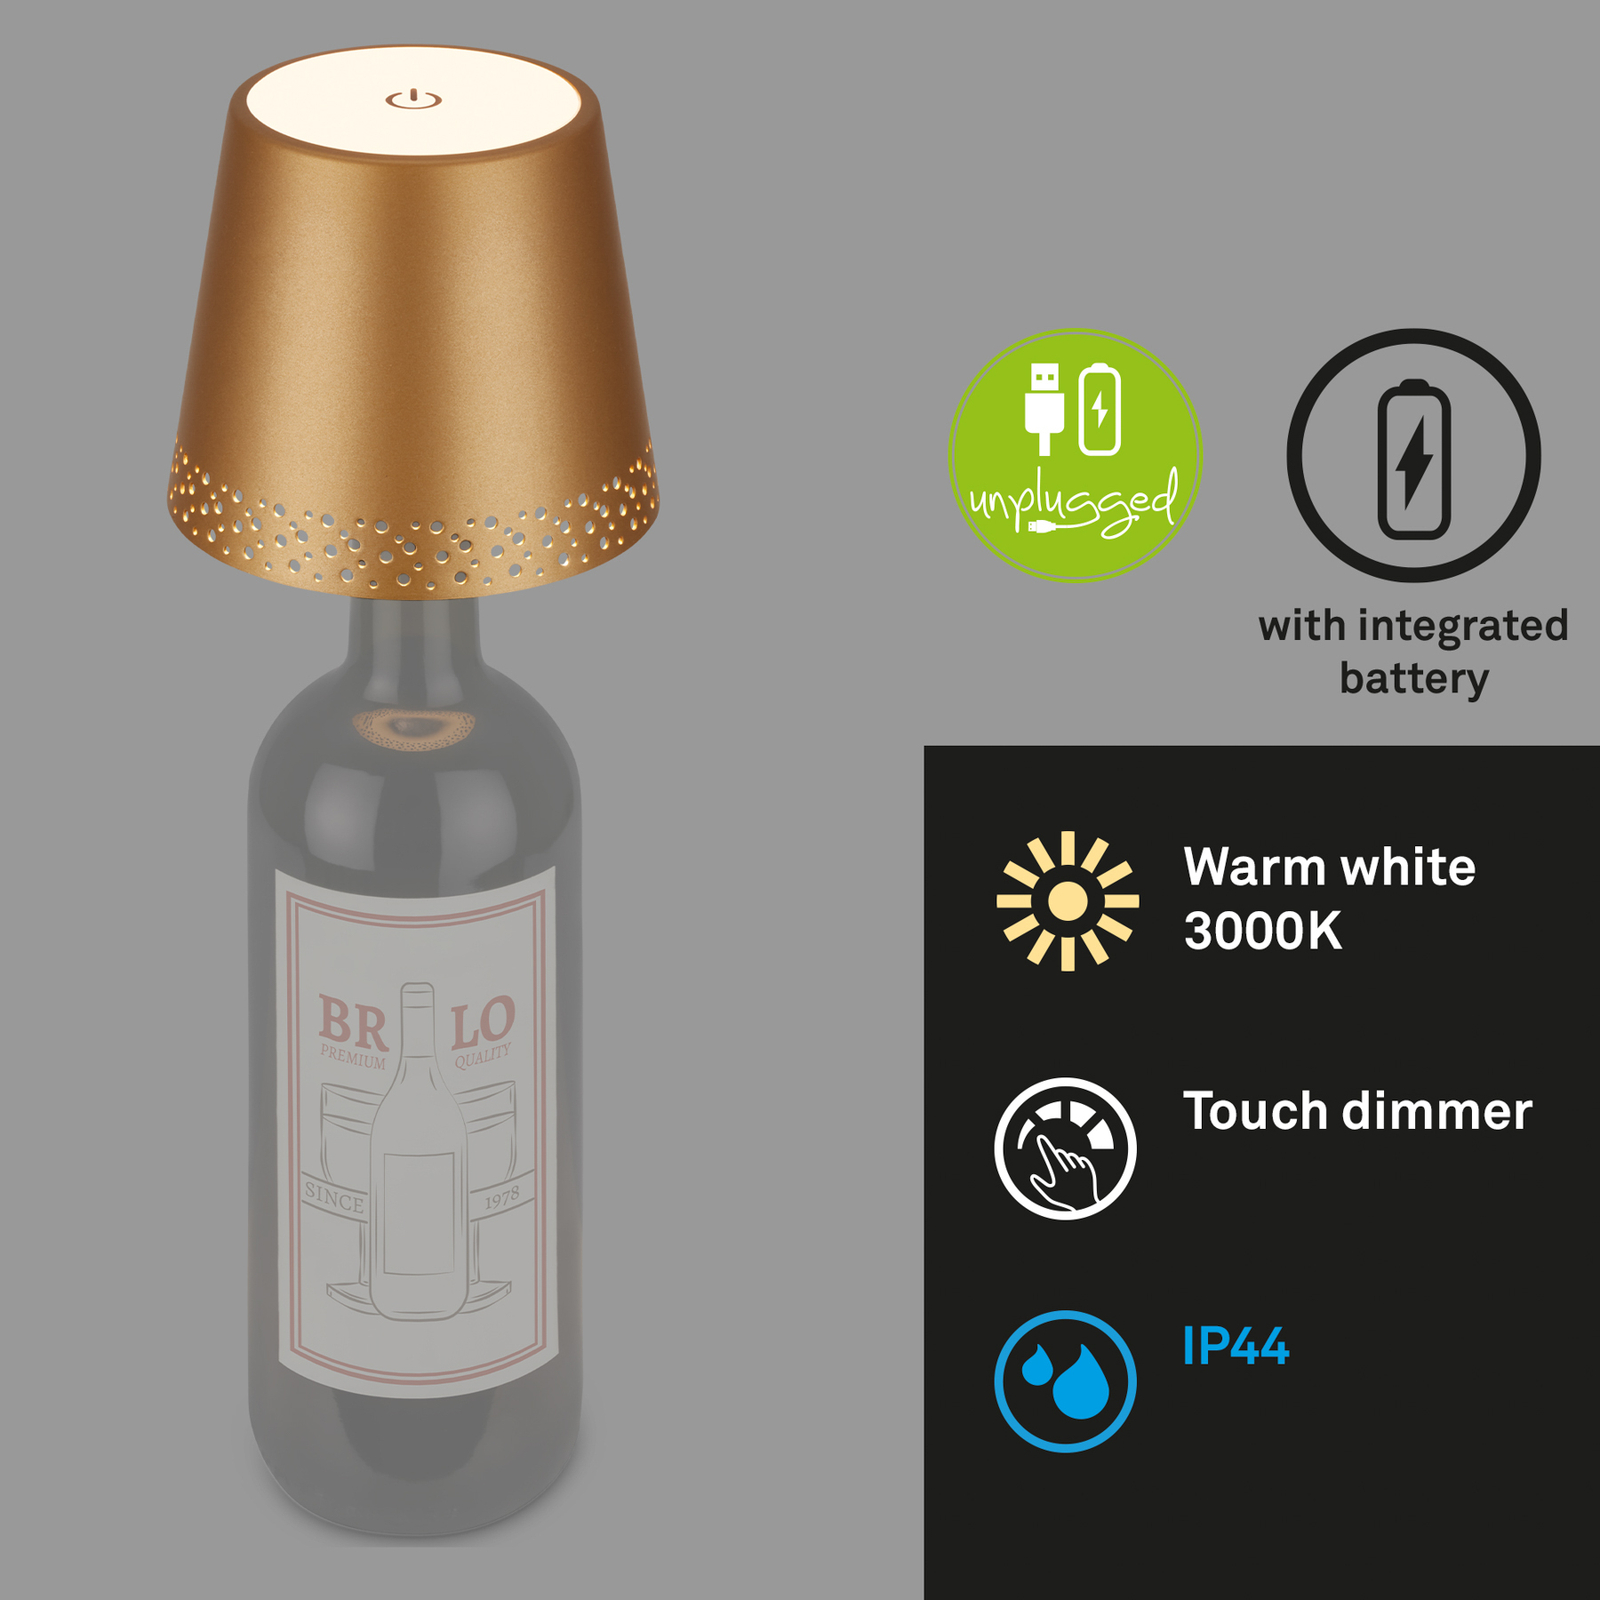 LED battery bottle light IP44 with a dimmer, gold